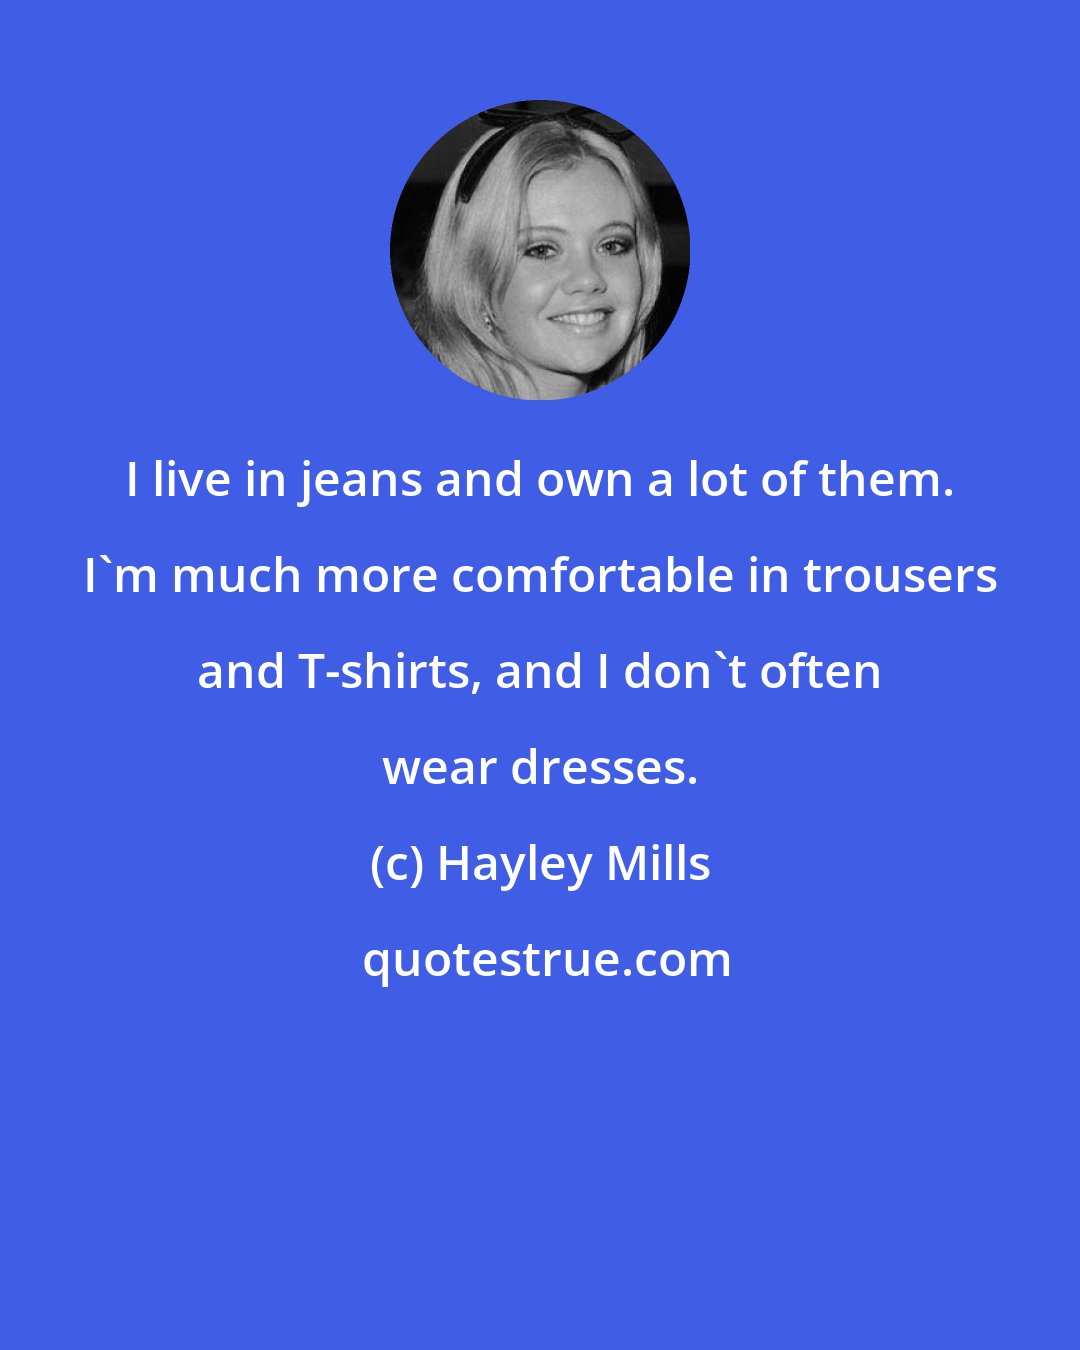 Hayley Mills: I live in jeans and own a lot of them. I'm much more comfortable in trousers and T-shirts, and I don't often wear dresses.